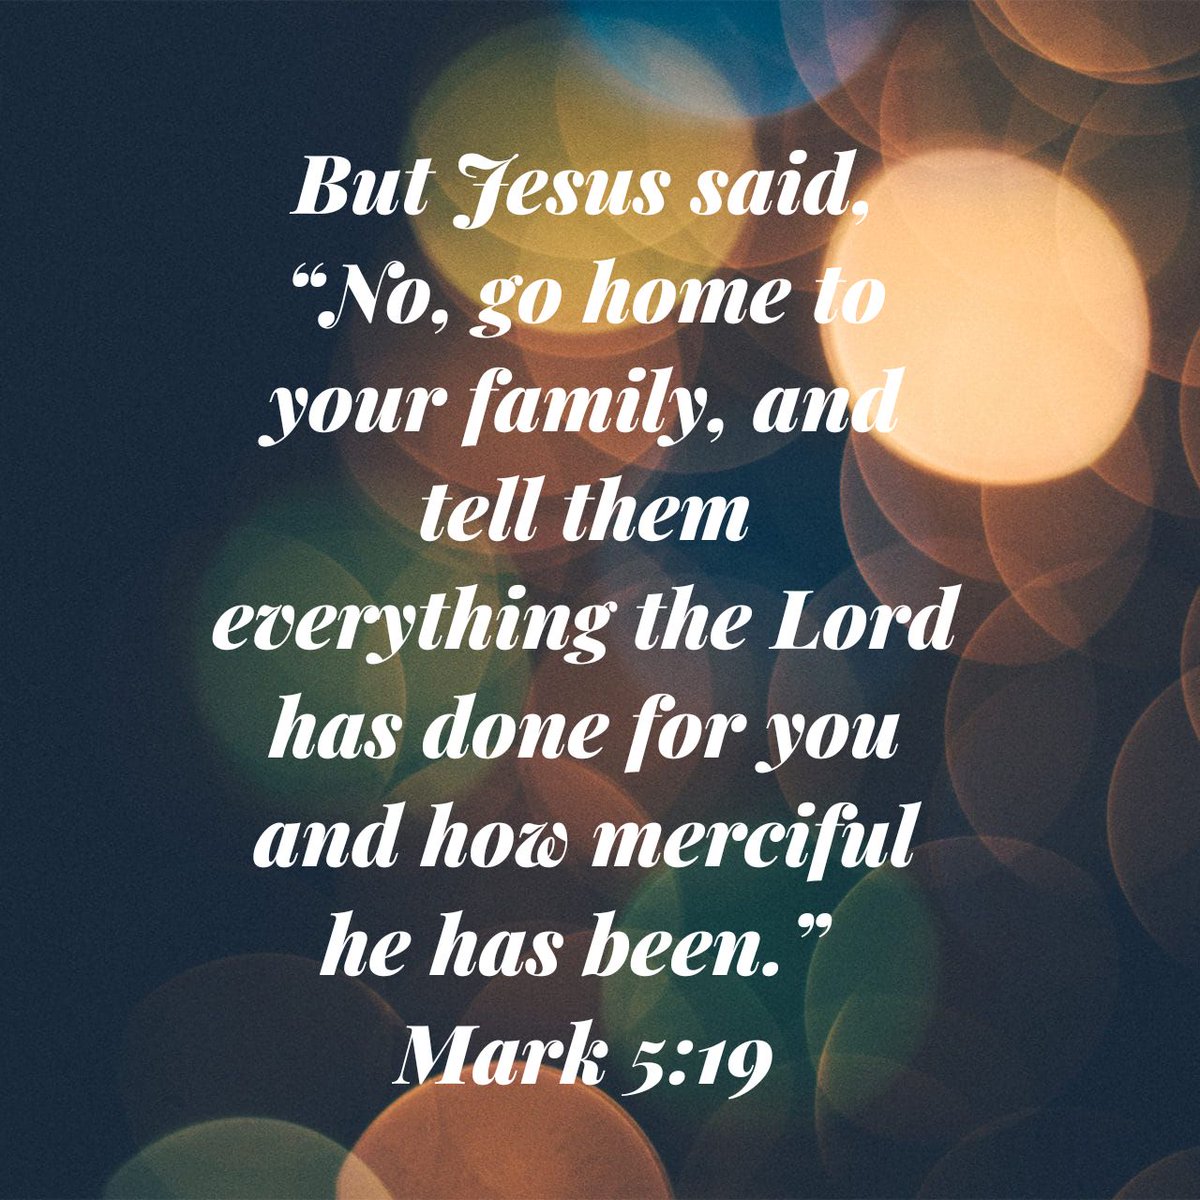 But Jesus said, “No, go home to your family, and tell them everything the Lord has done for you and how merciful he has been.”
Mark 5:19 NLT

Testimony! #Walkinginpeace